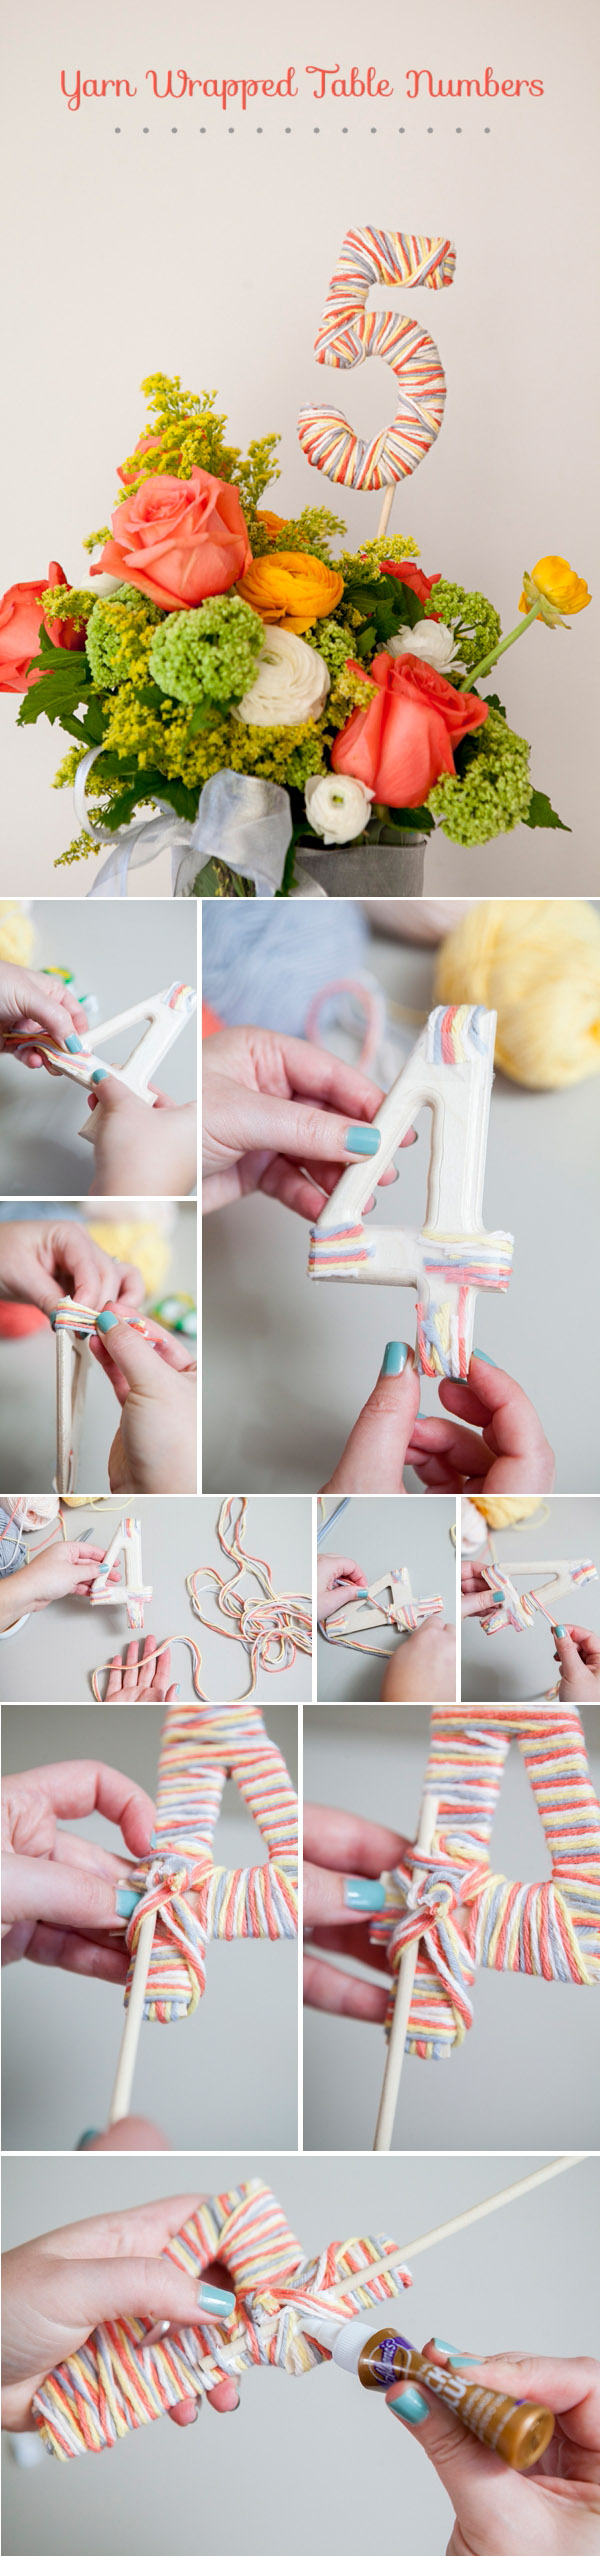 diy yarn wrapped table numbers for wedding table decoration ideas